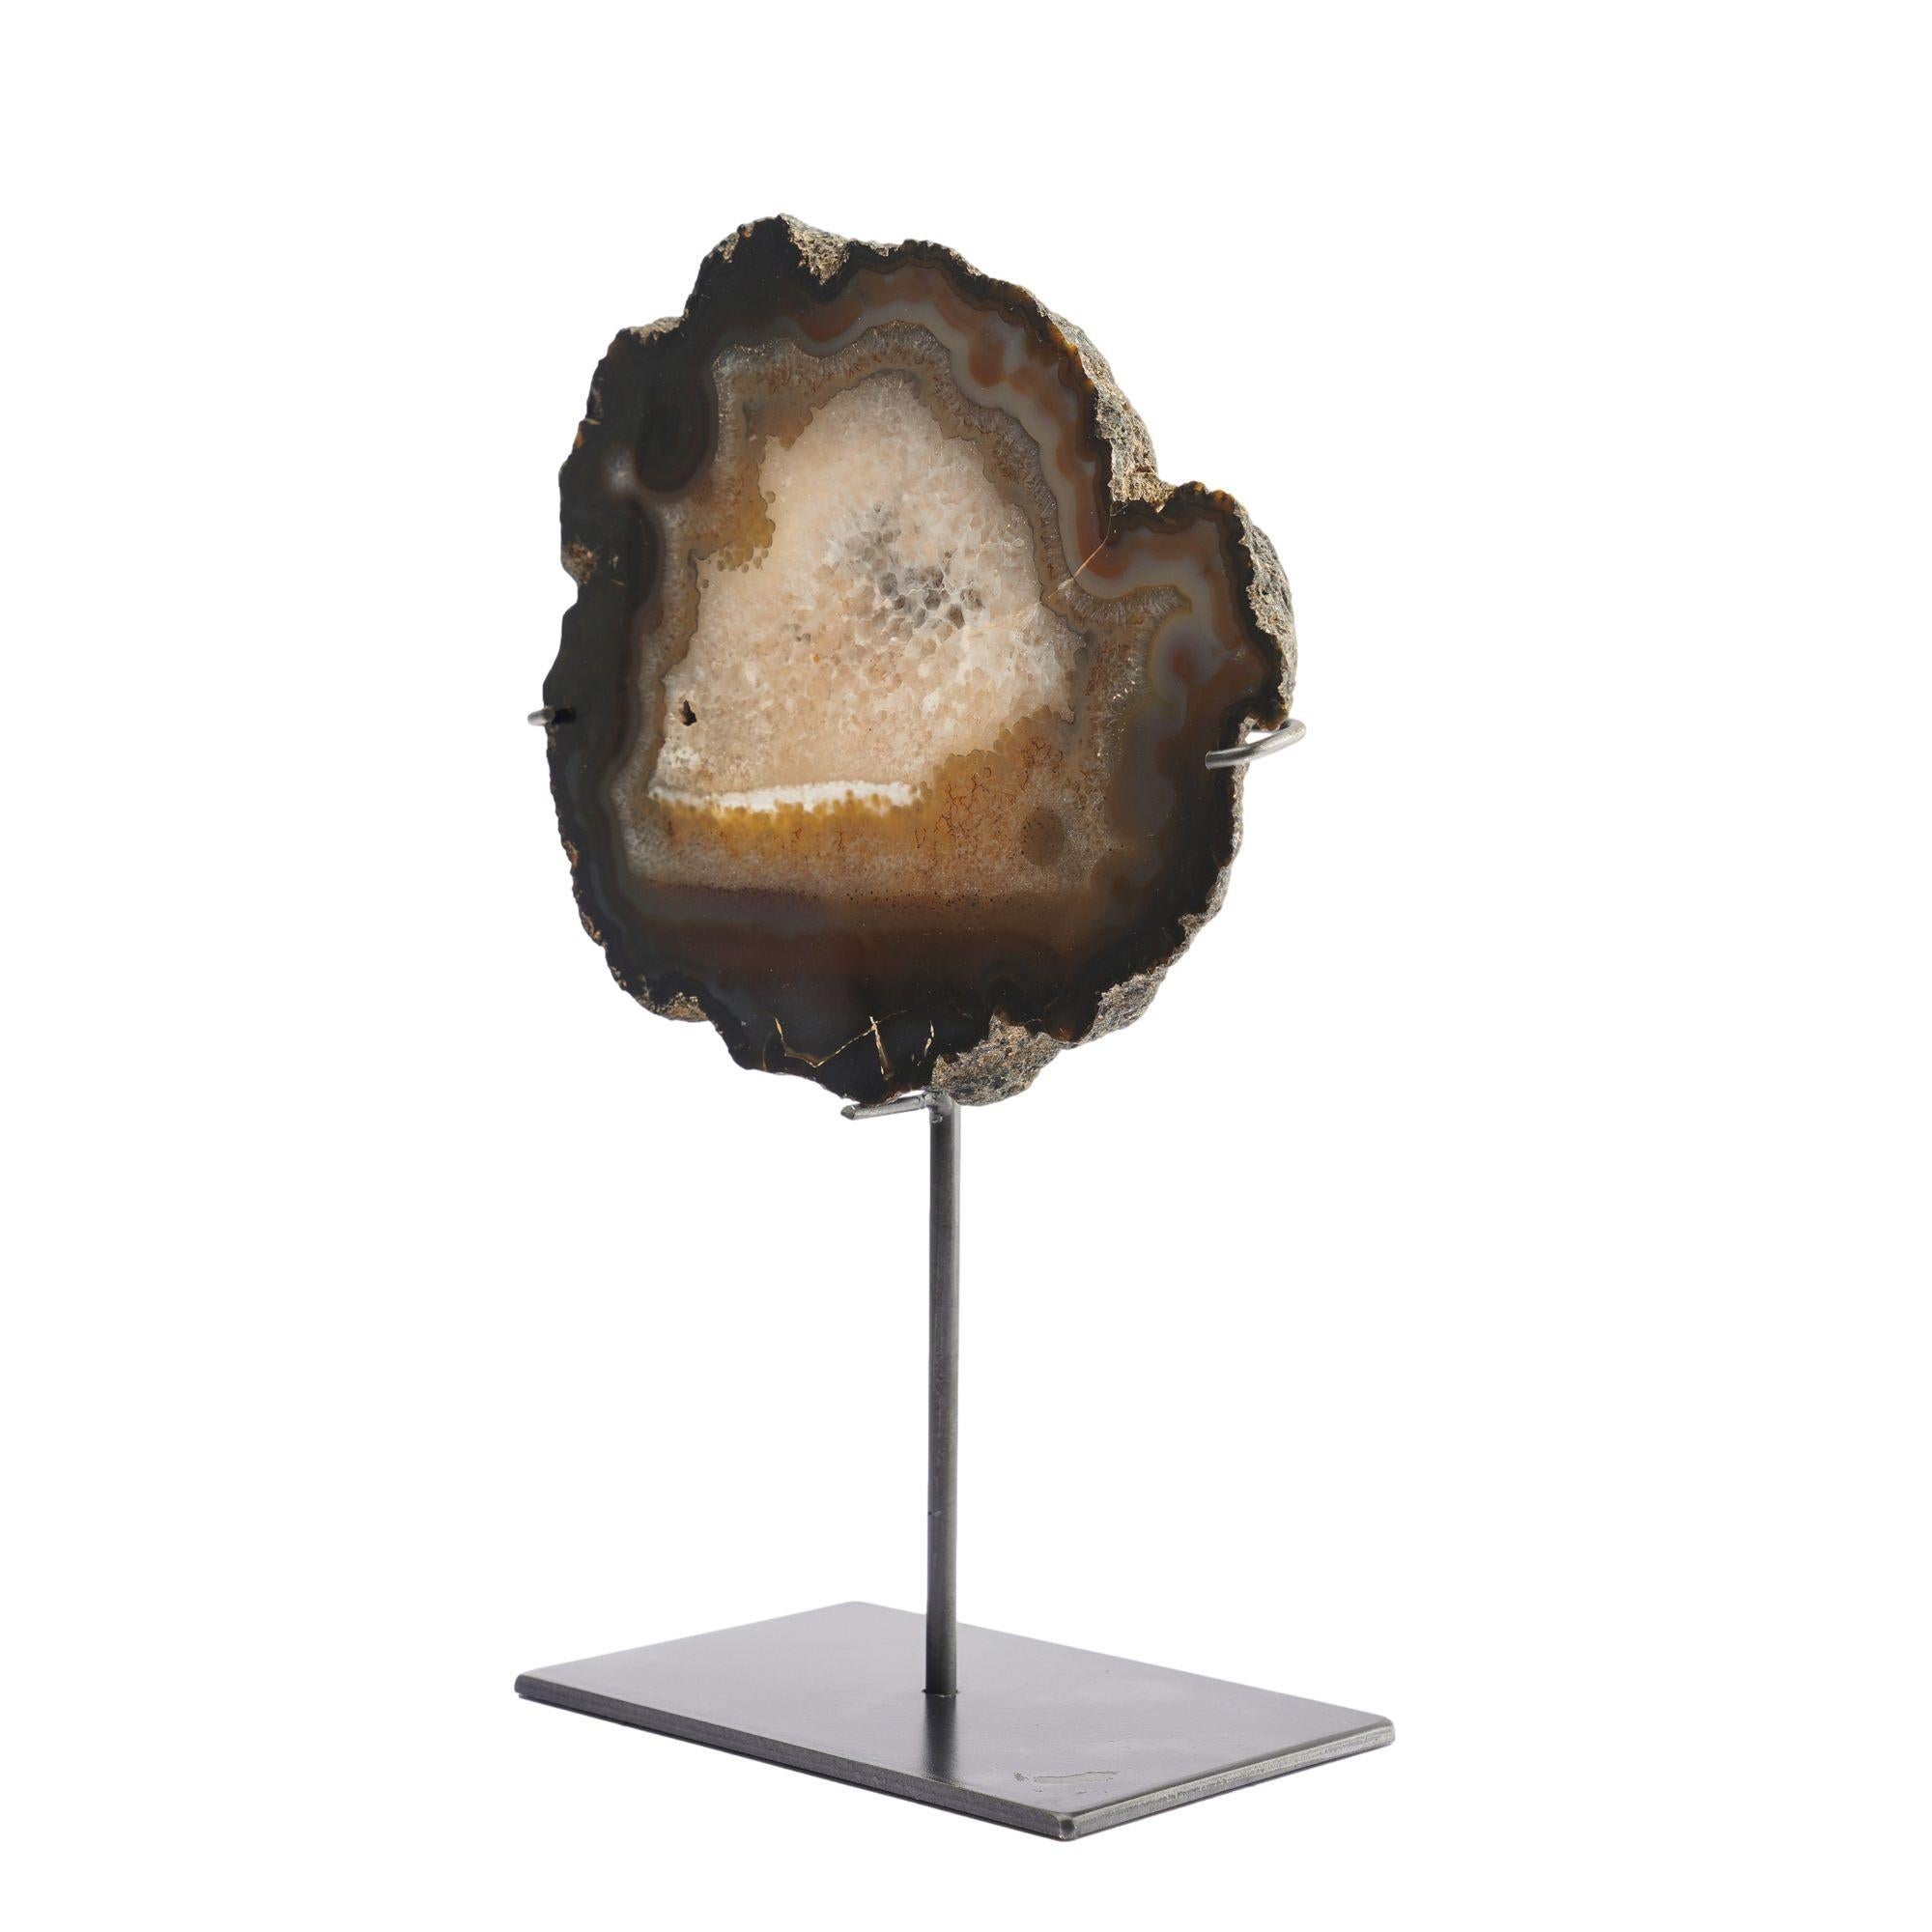 Slice cut agate geode specimen from Botswana in shades of brown and white, mounted on a custom stand.